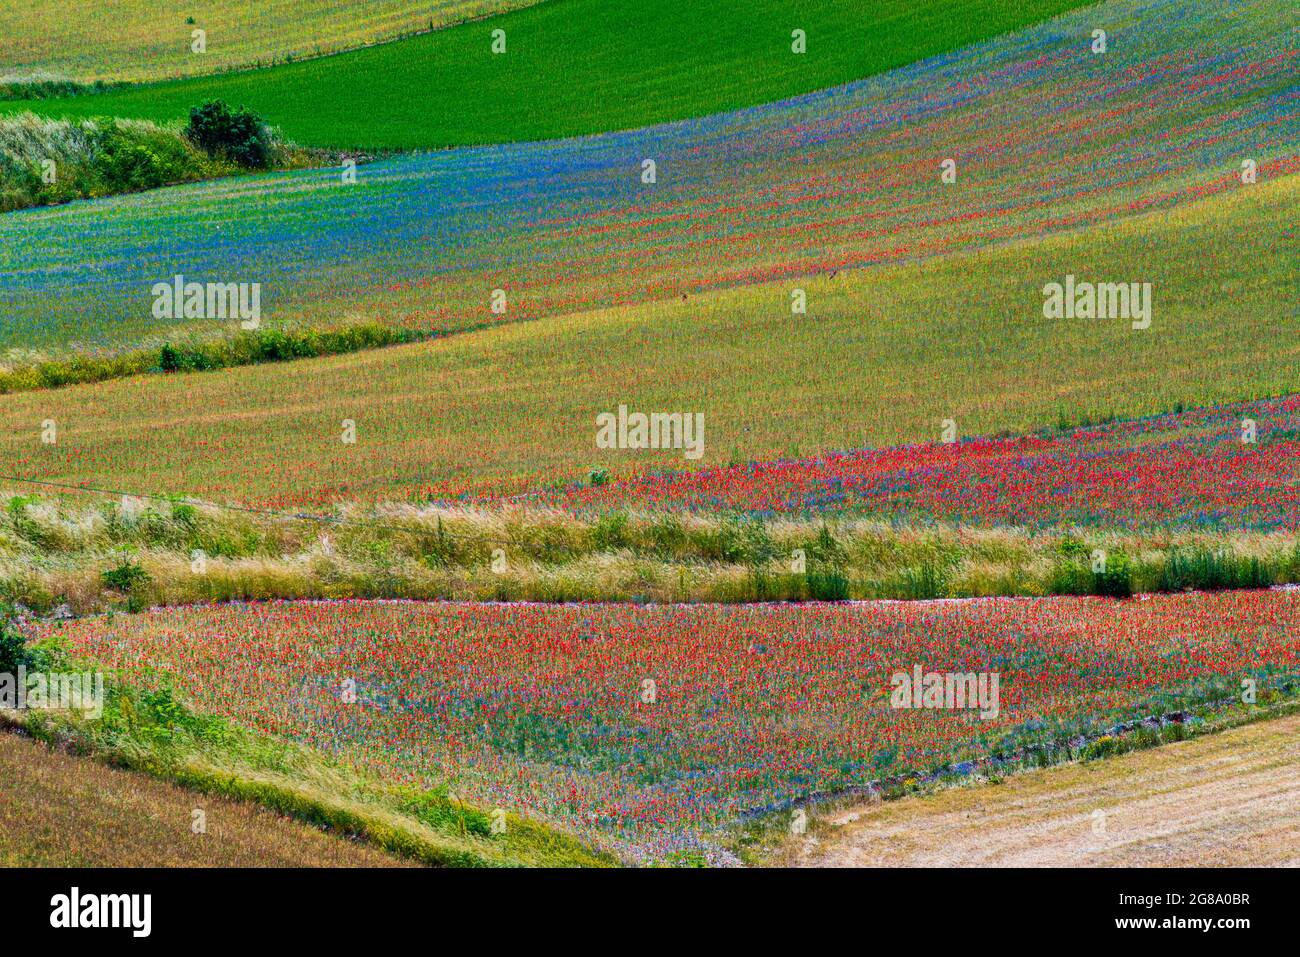 Blooming cultivated fields, famous colourful flowering plain in the Apennines, Castelluccio di Norcia highlands, Italy. Agriculture of lentil crops, r Stock Photo